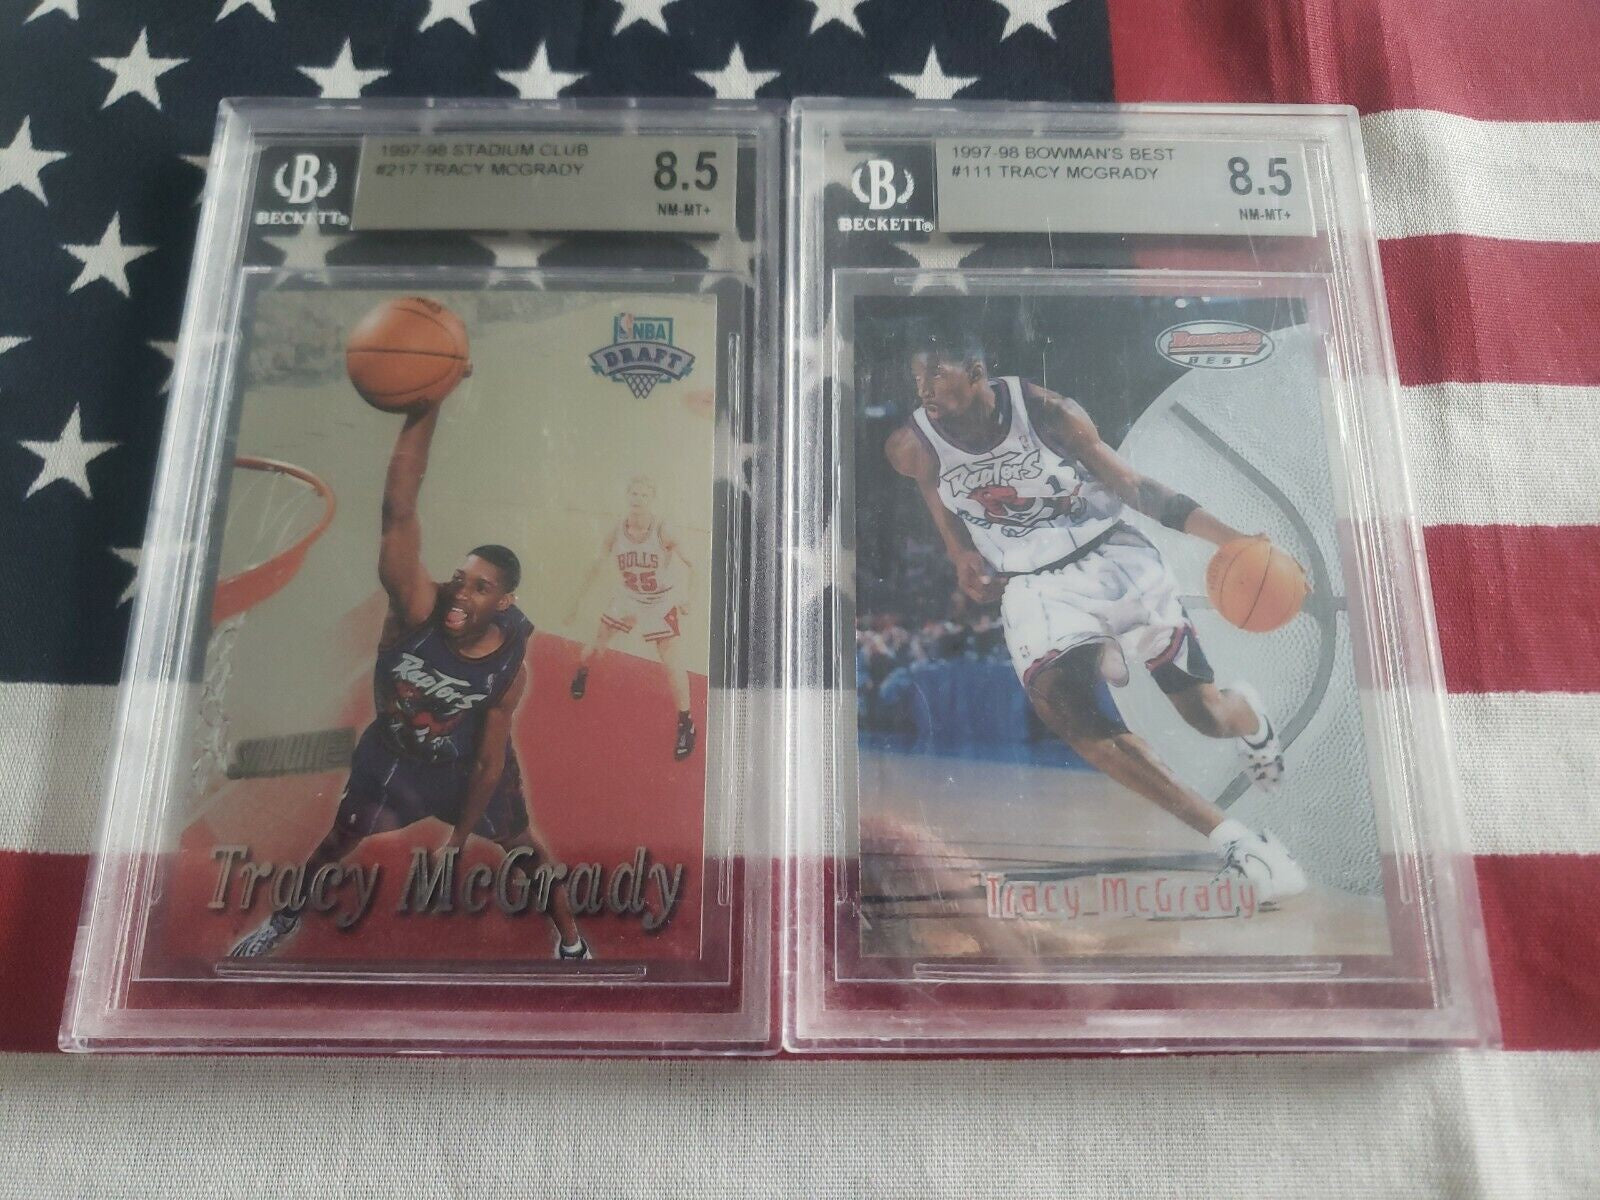 1997-98 Tracy McGrady Toronto Raptors RC (Rookie Card) (Graded 9, Various Grading Companies, May Not Get Card In Photo)